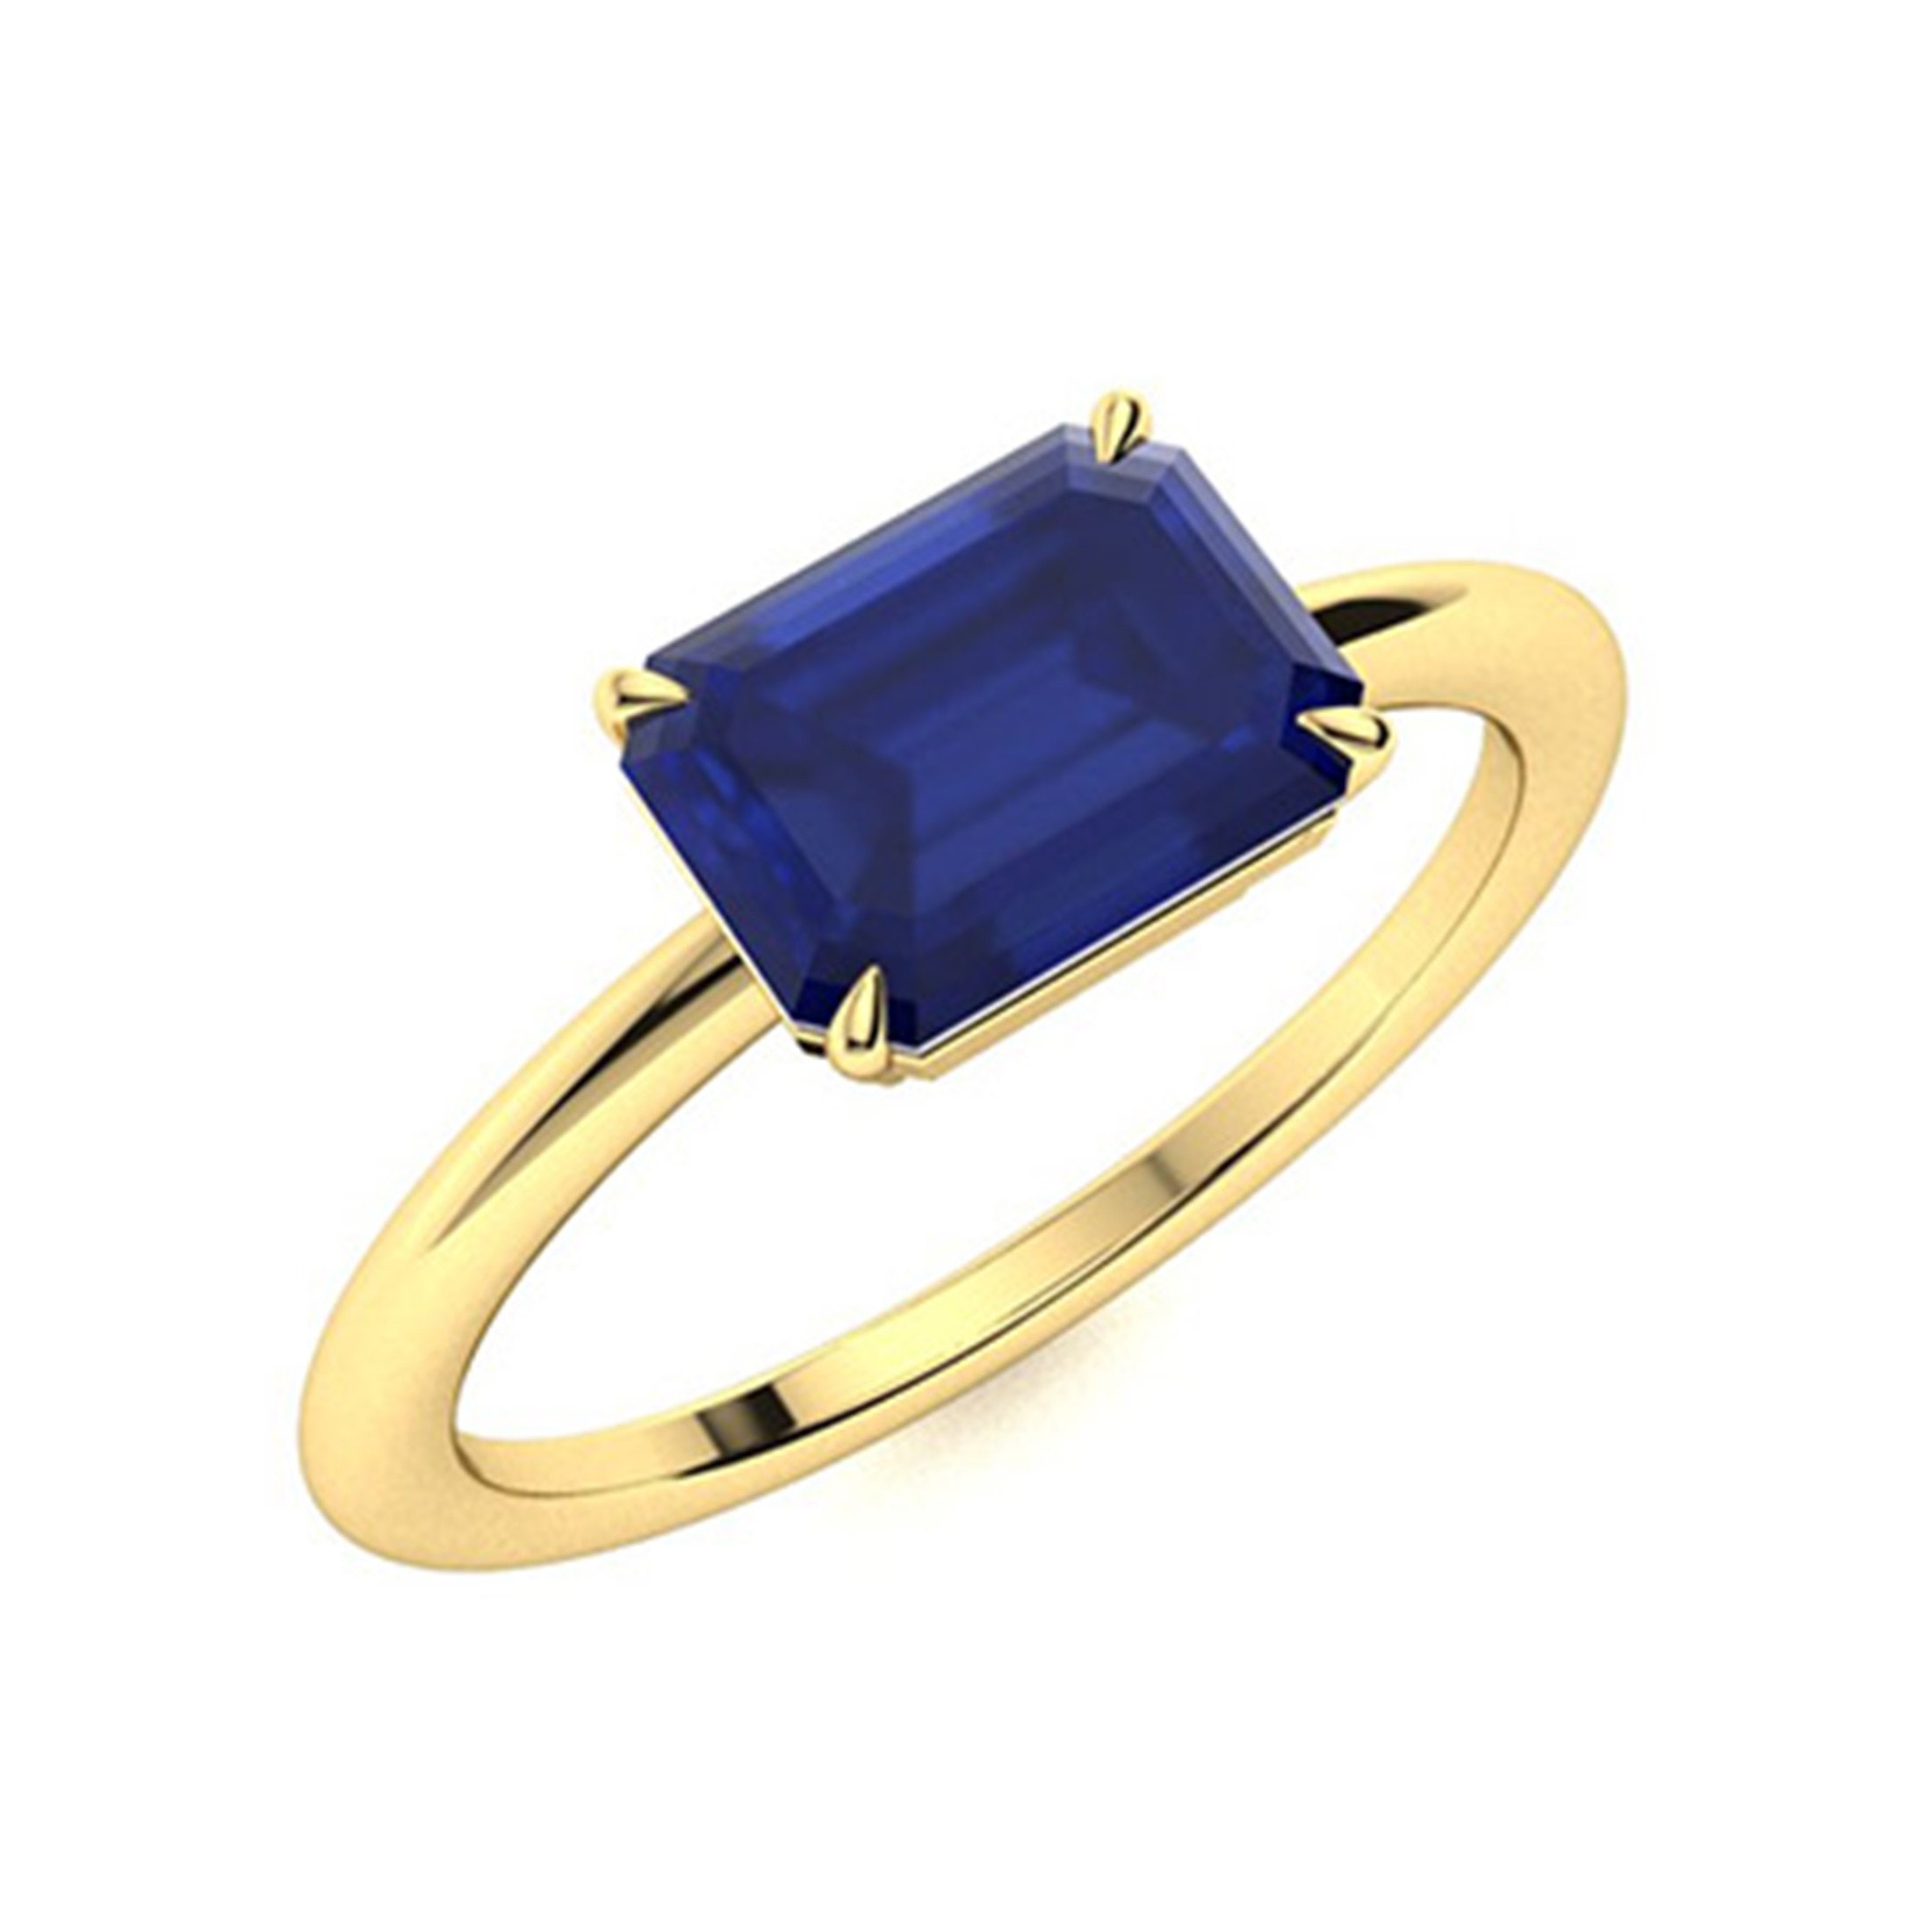 Natural Blue Sapphire 5.25 Carat Ring Gold Plated Handmade - Etsy